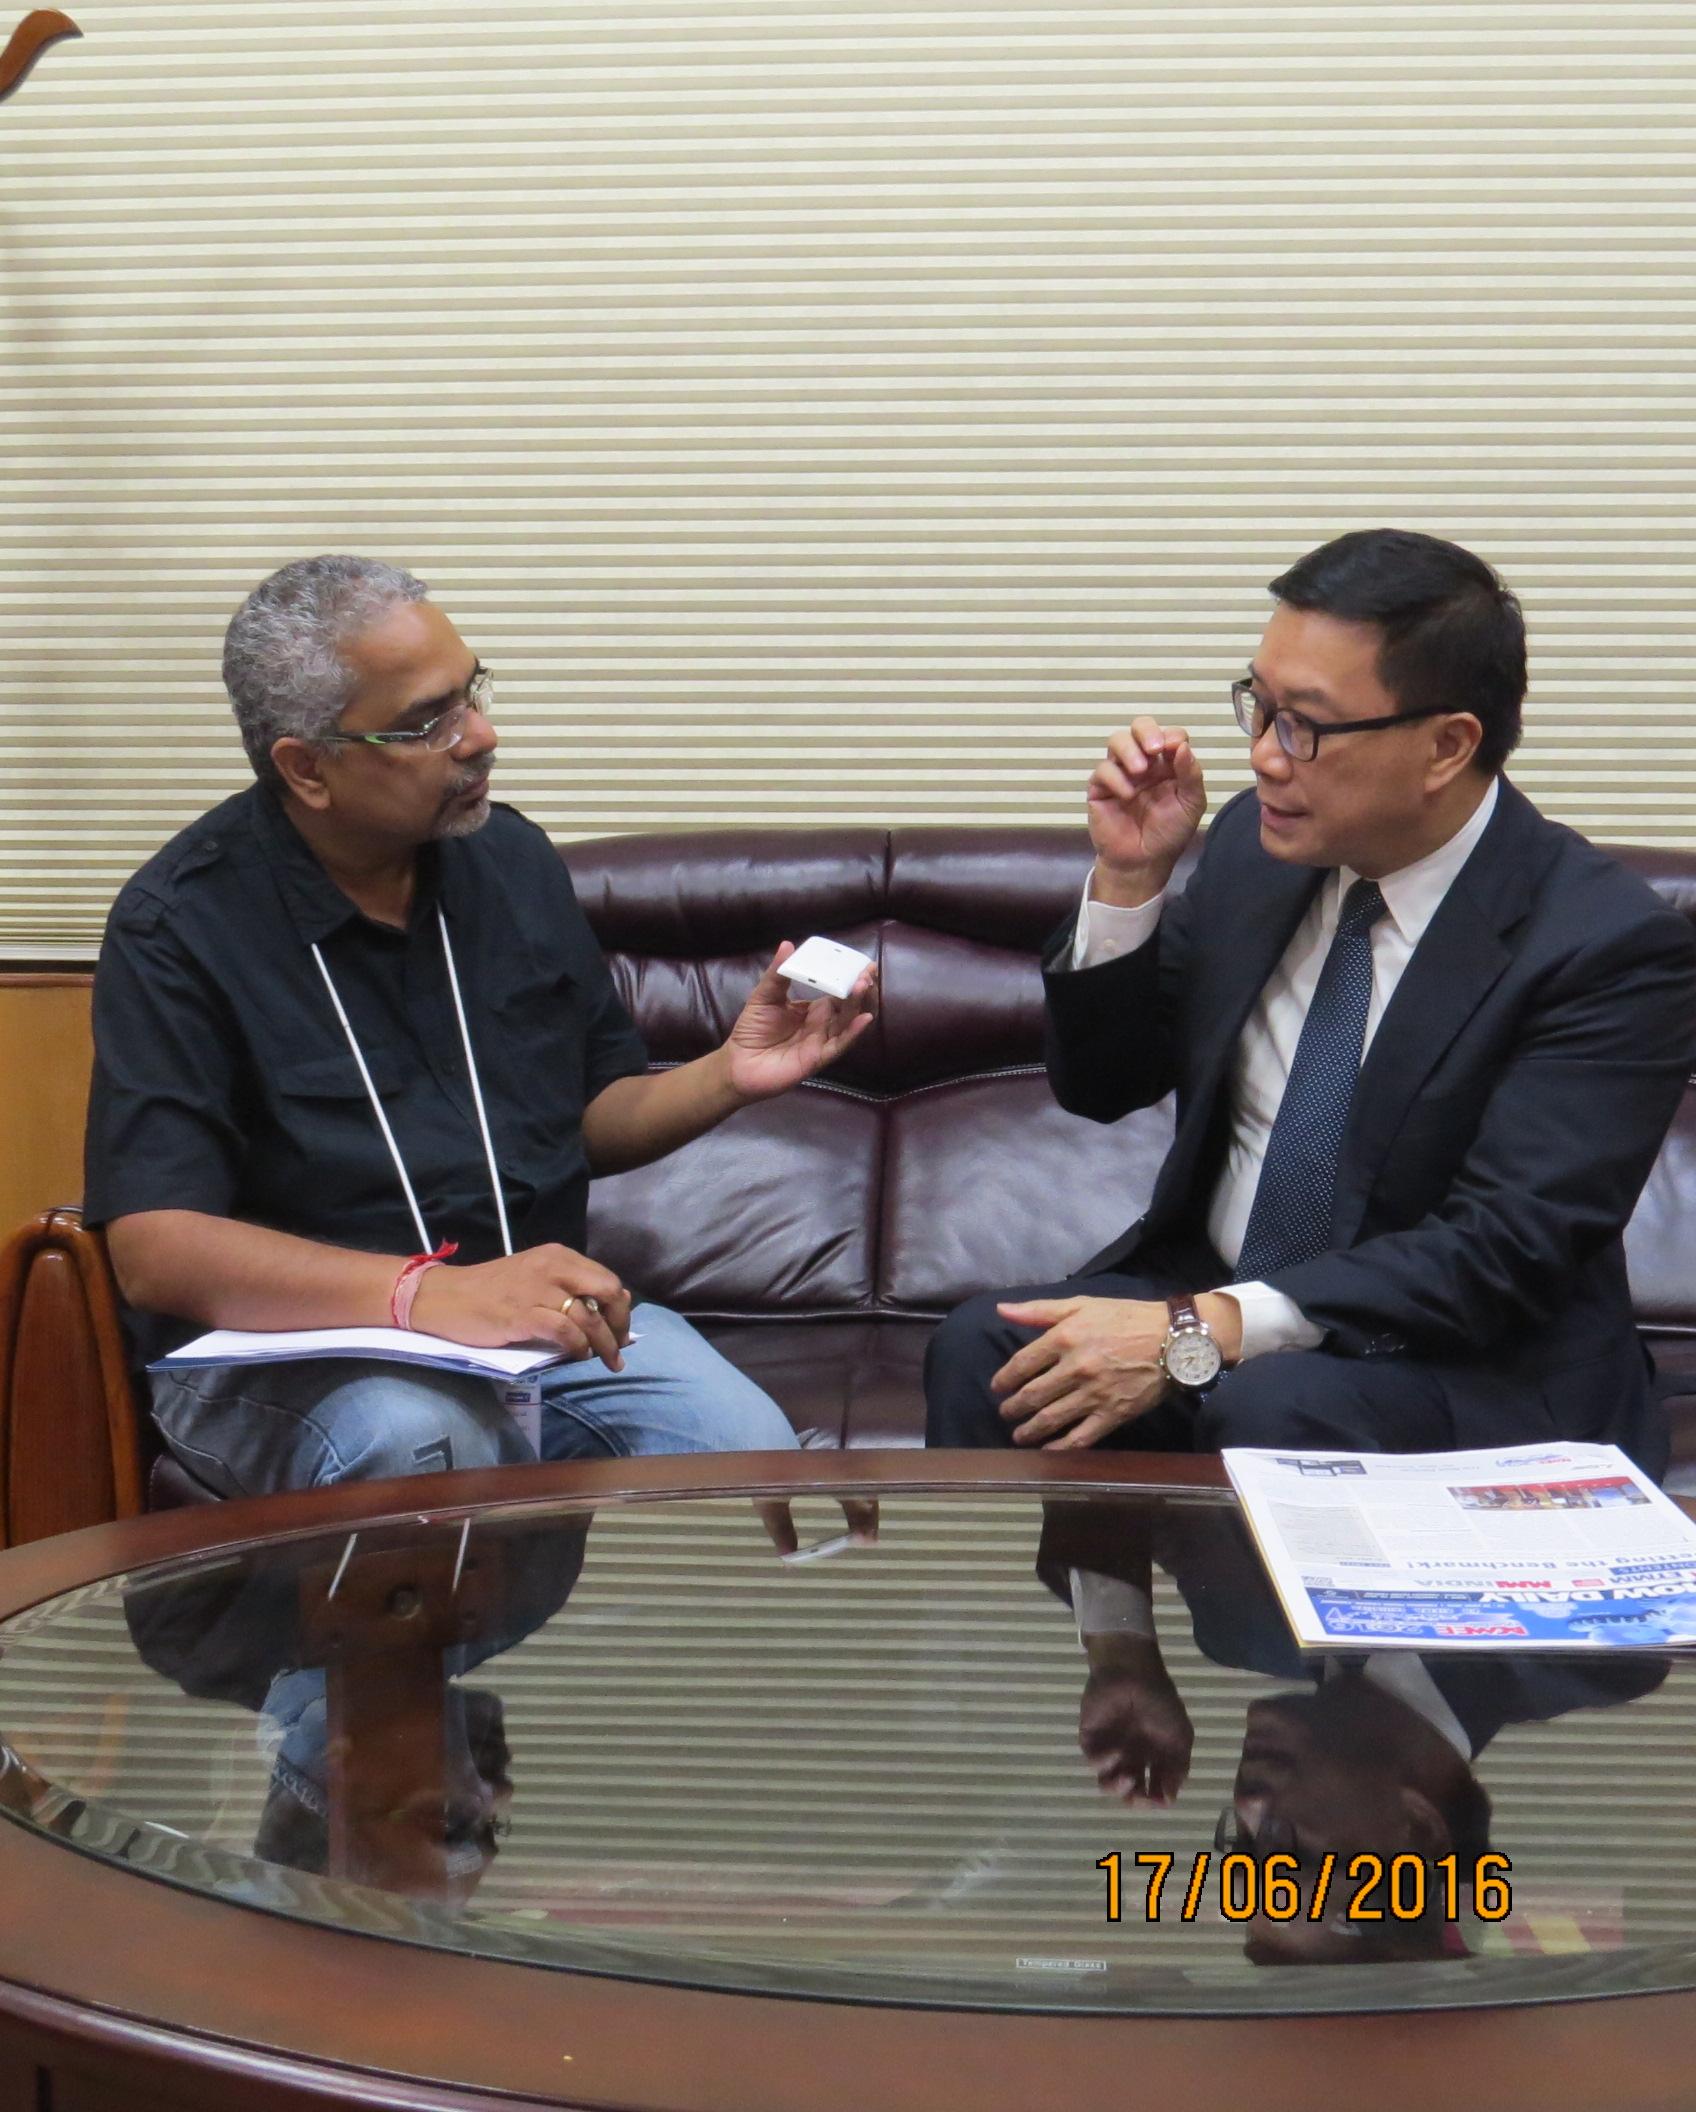 Director General Charles Li(R)
The Times of India journalist (L)